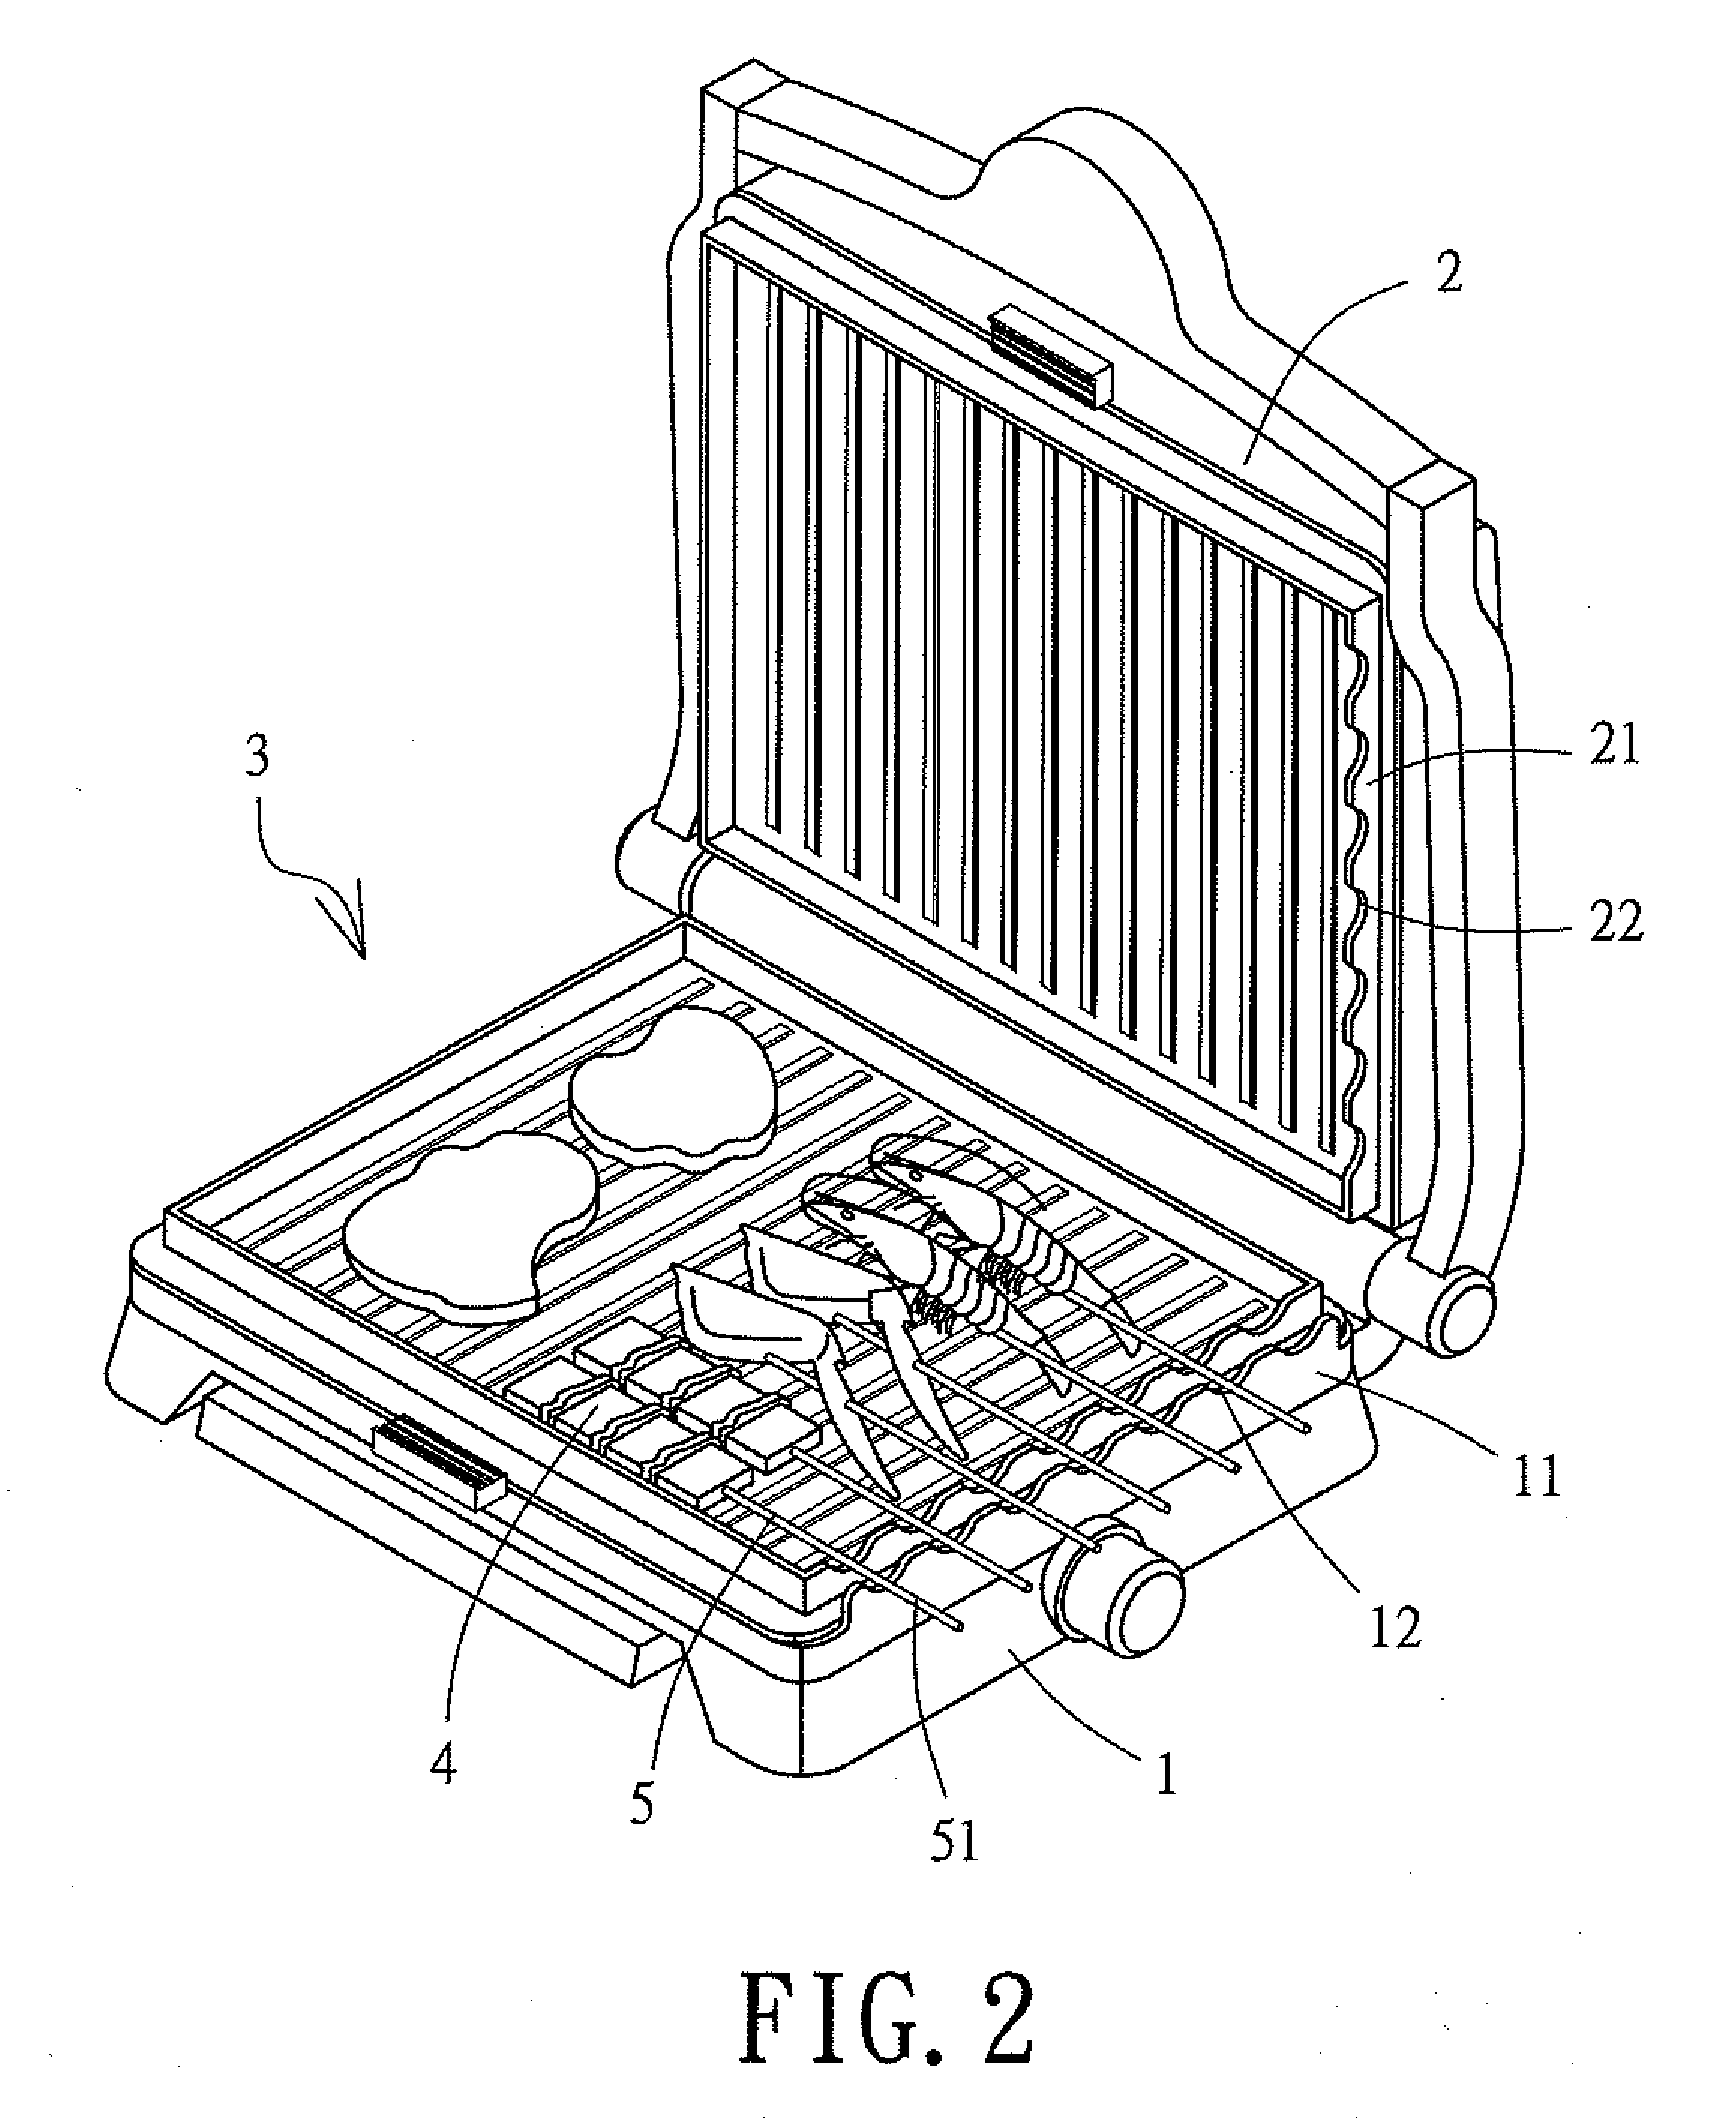 Electric grill with skewer holders